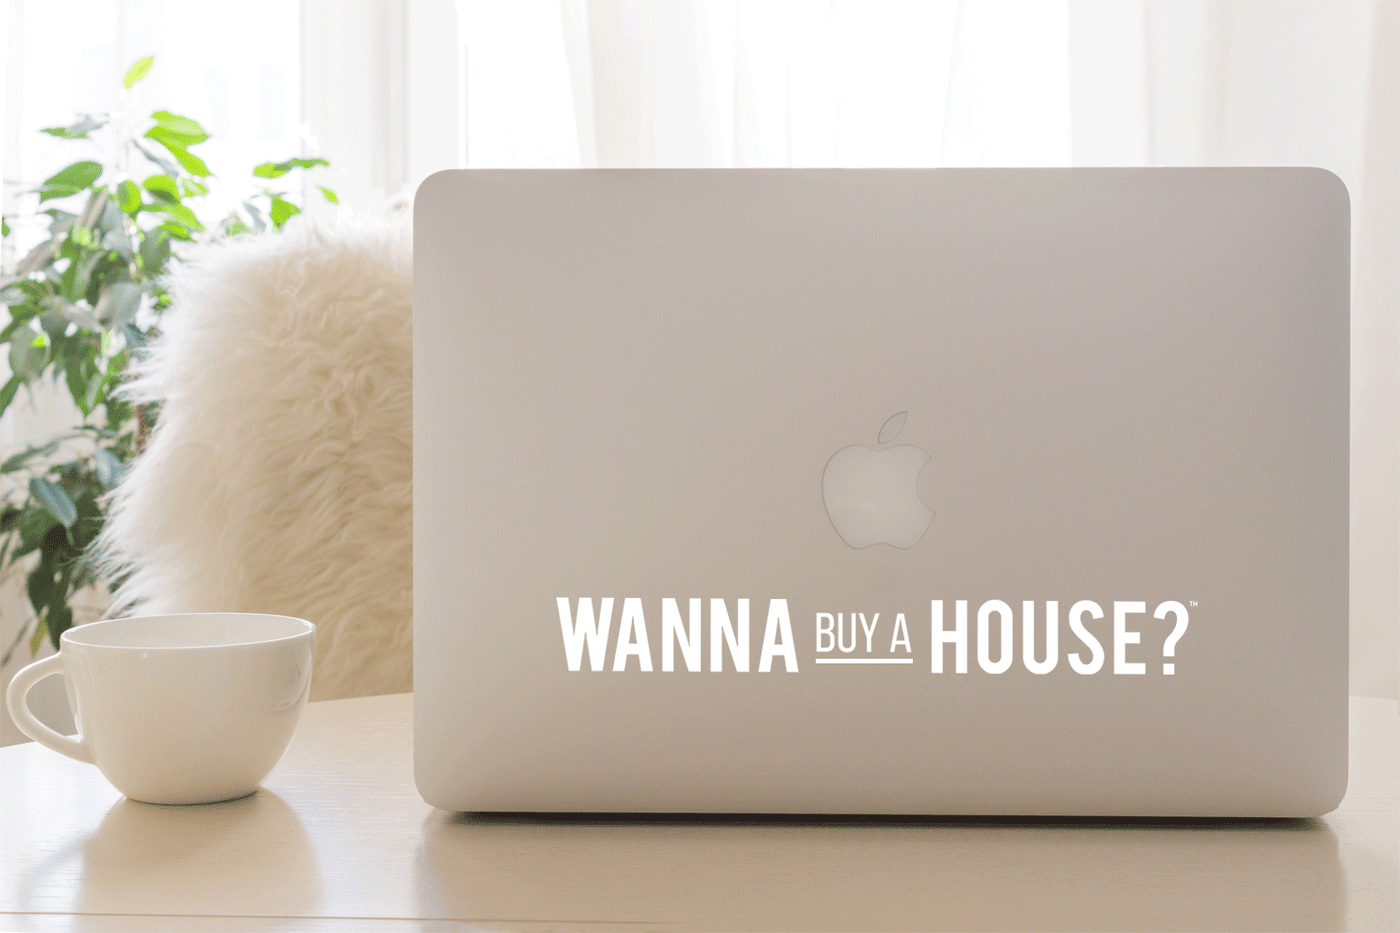 Wanna Buy a House?™ - White Vinyl Transfer Decal 9"